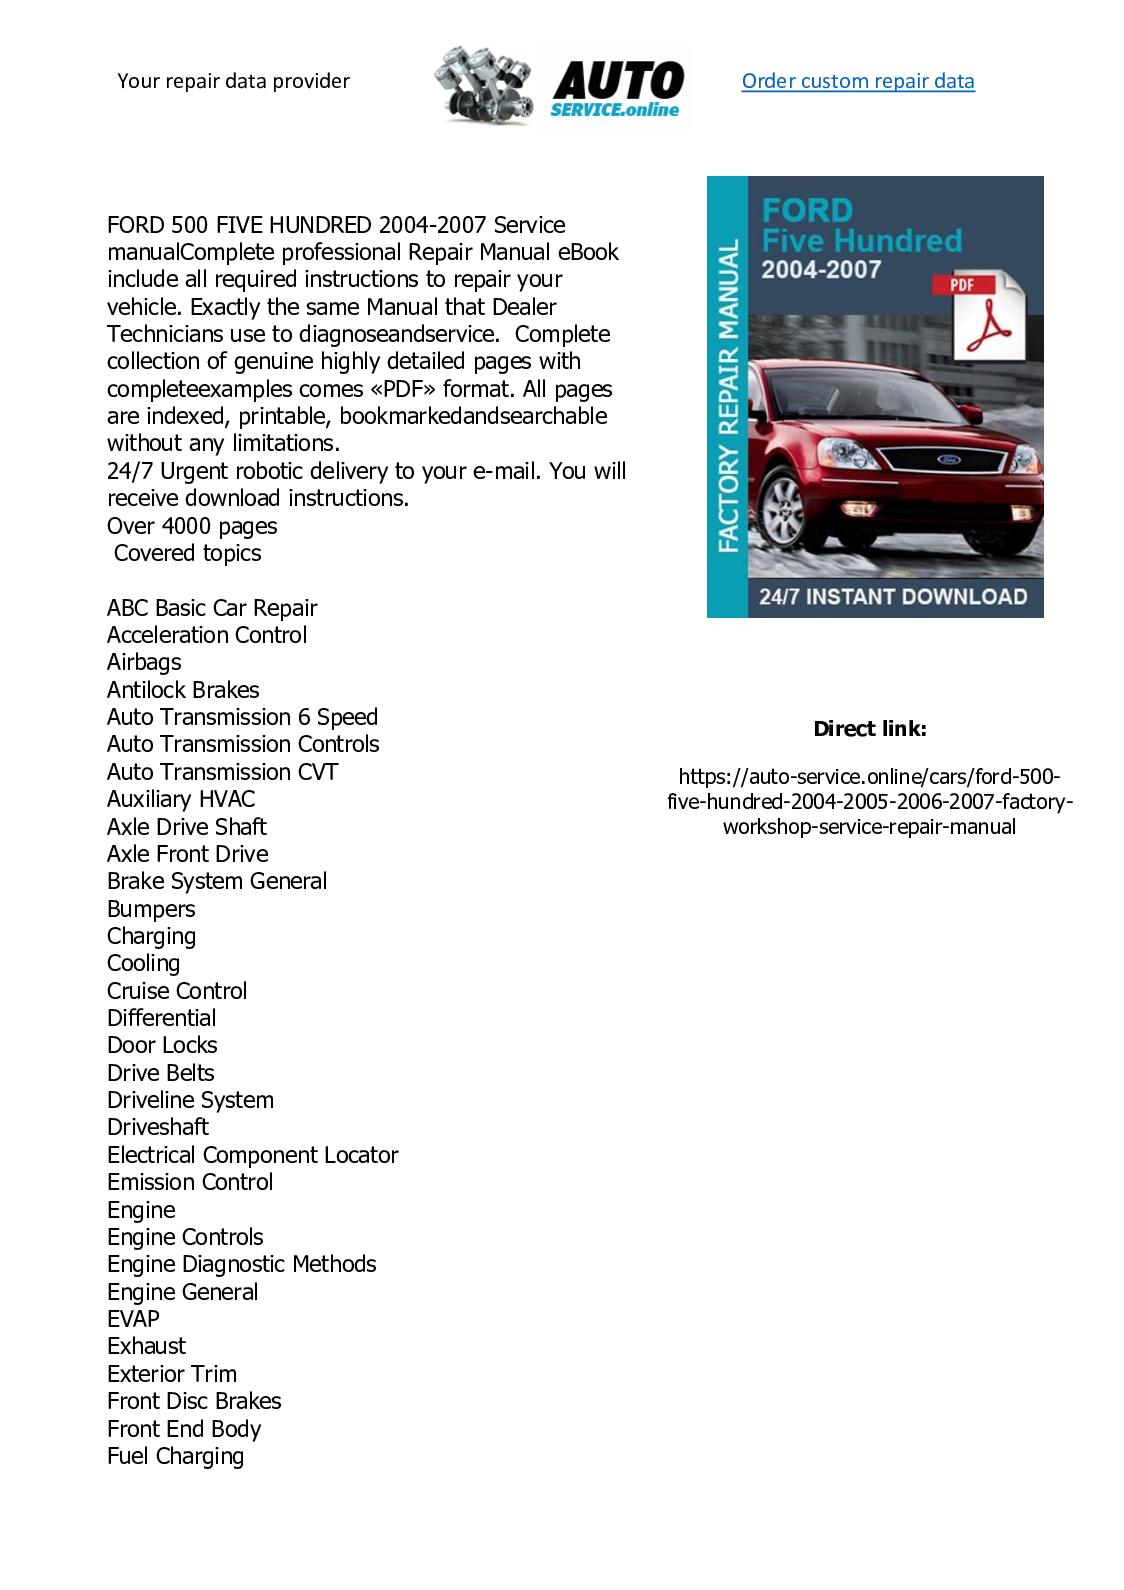 Ford five hundred service manual download windows 10